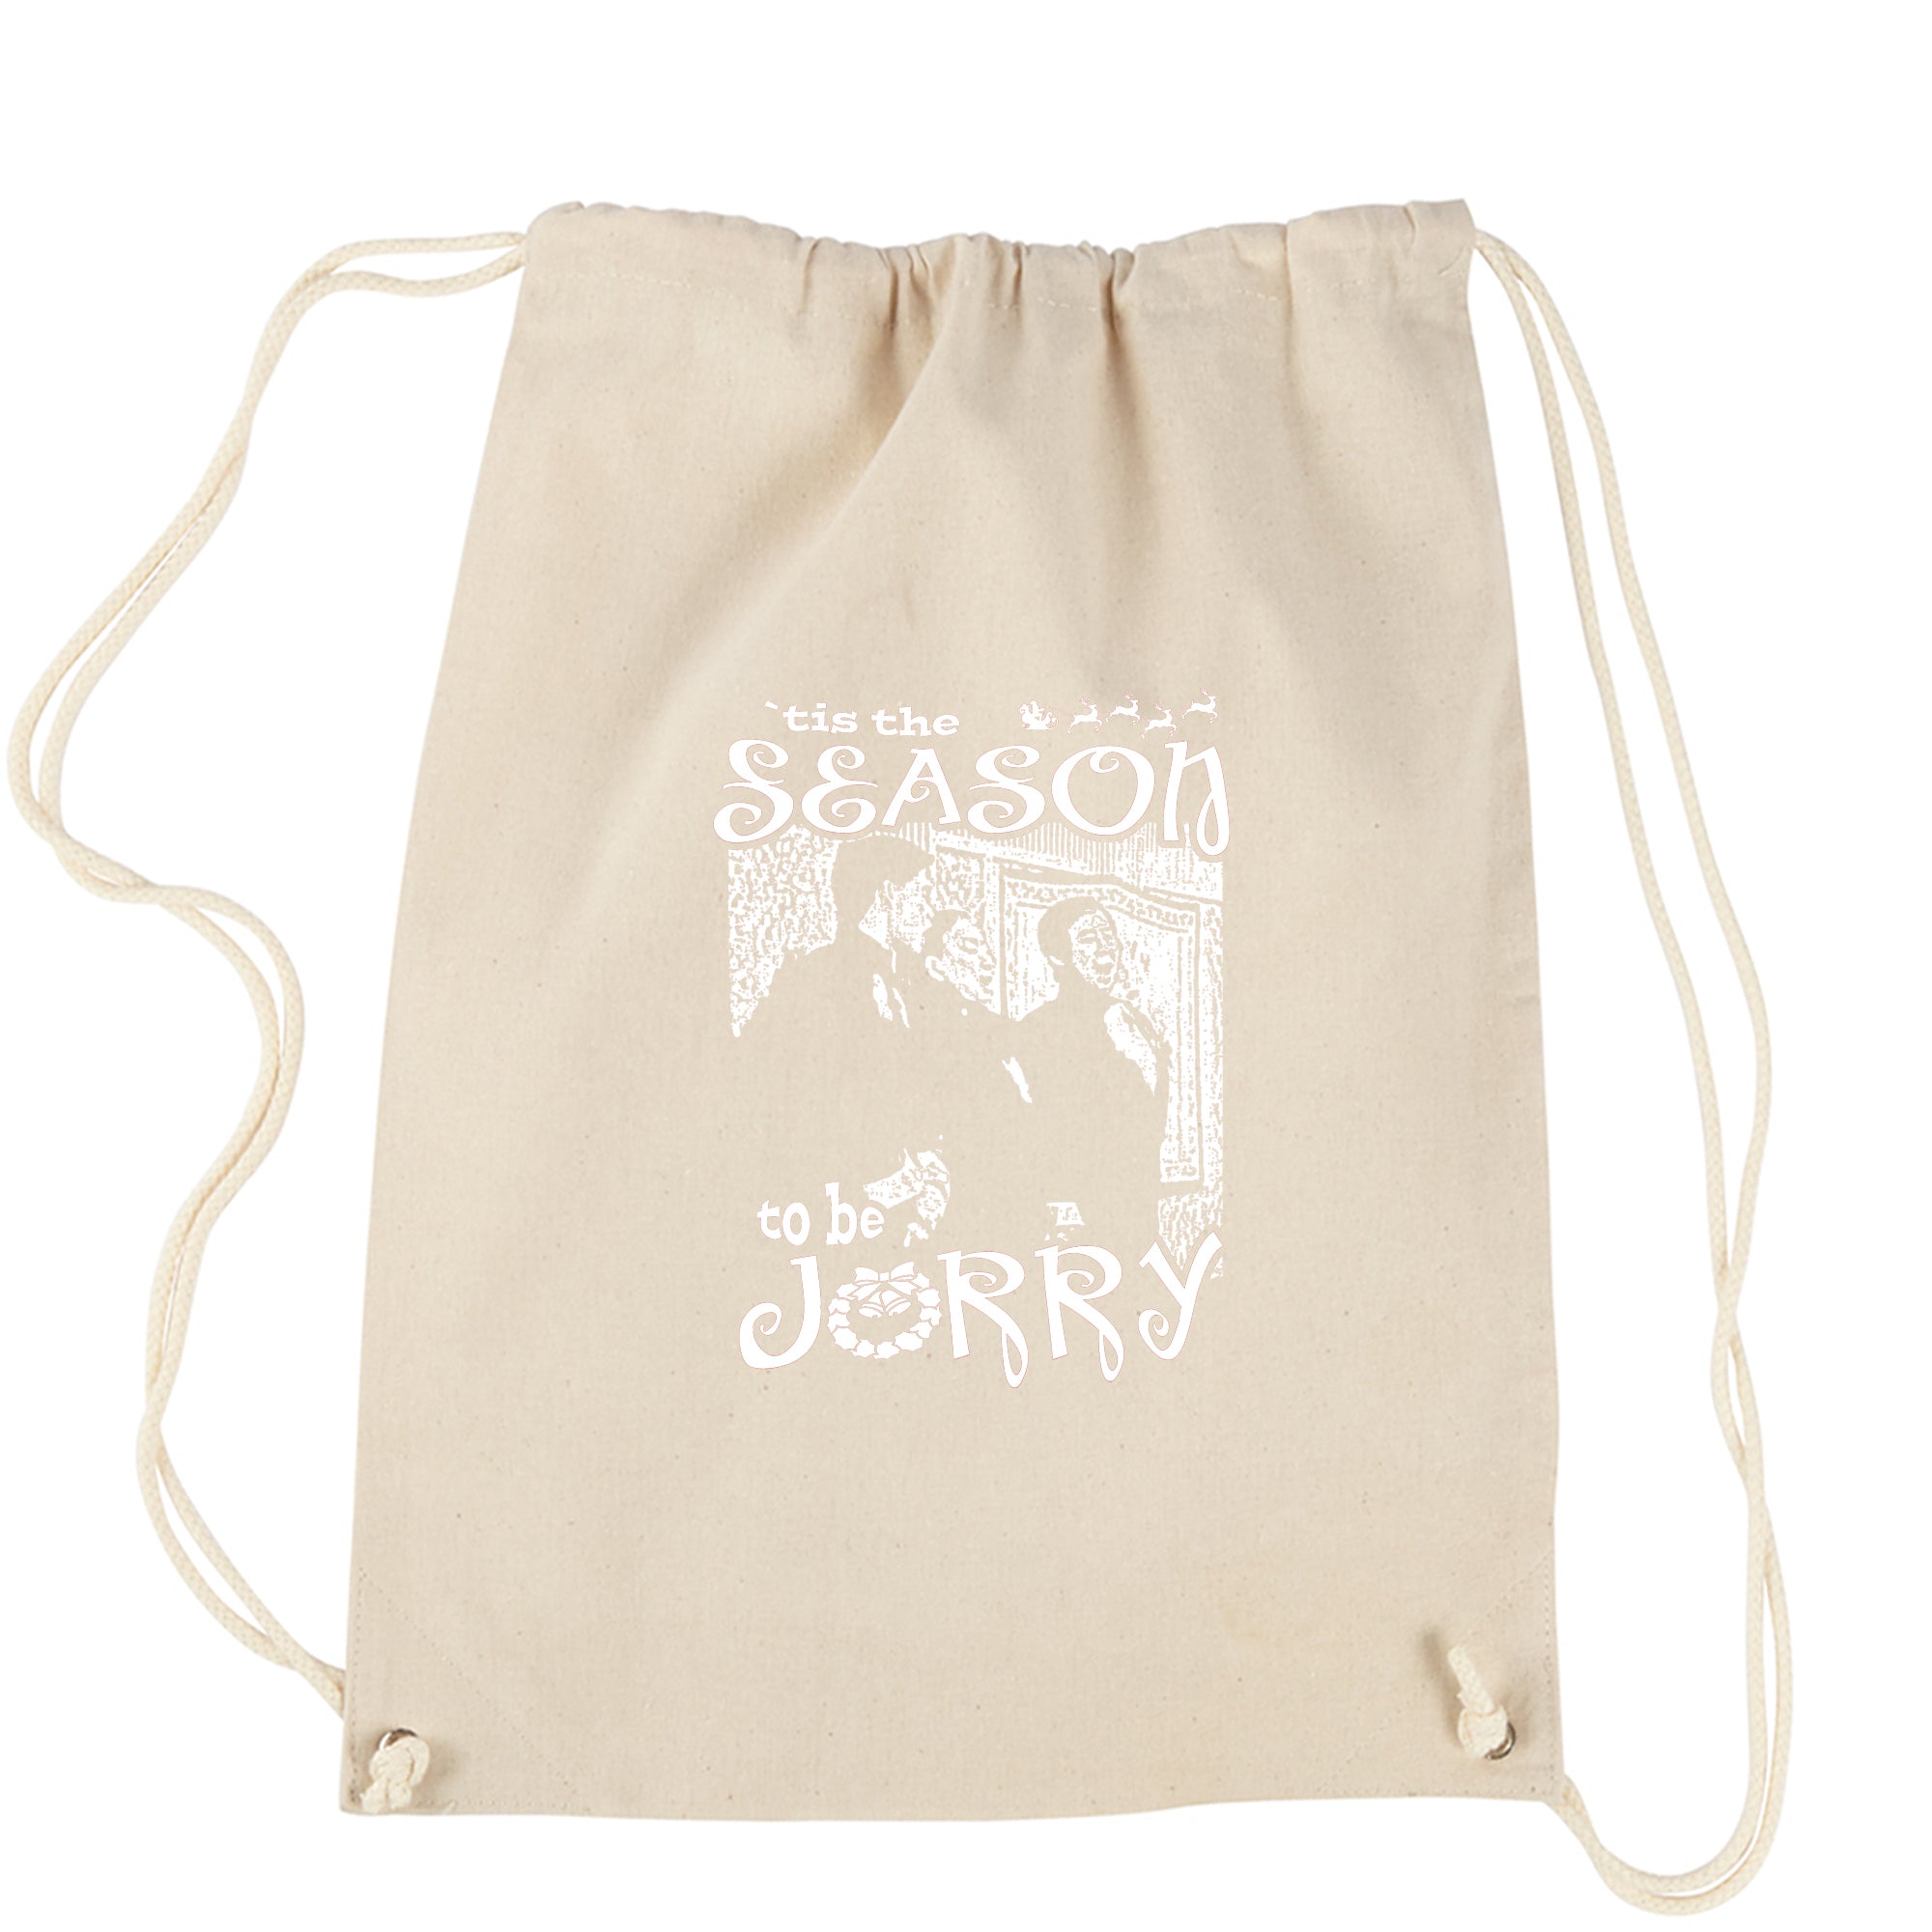 A Christmas Story Tis The Season to be Jorry Drawstring Backpack